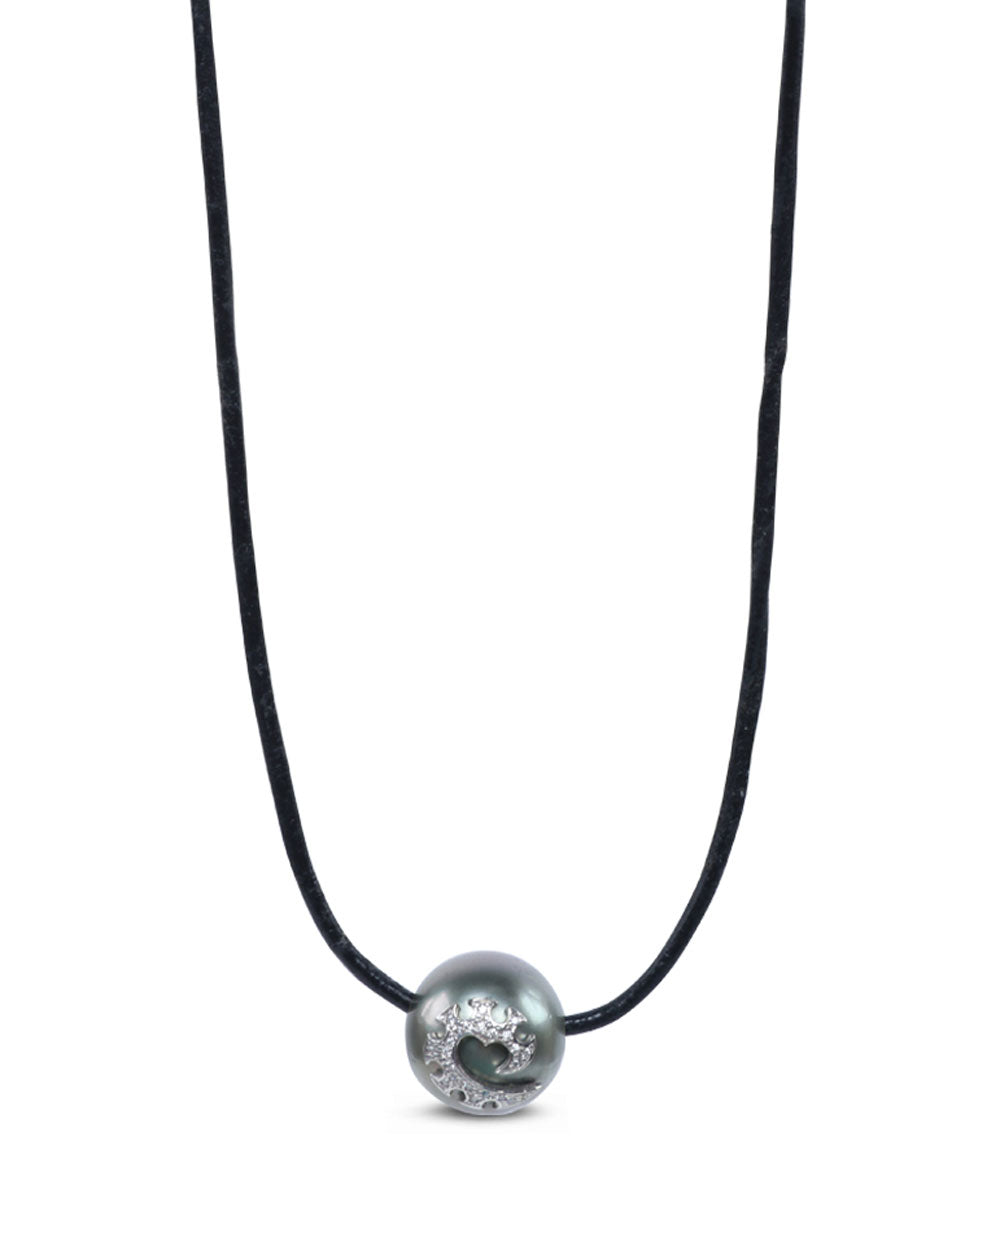 Body Armor Pearl Necklace